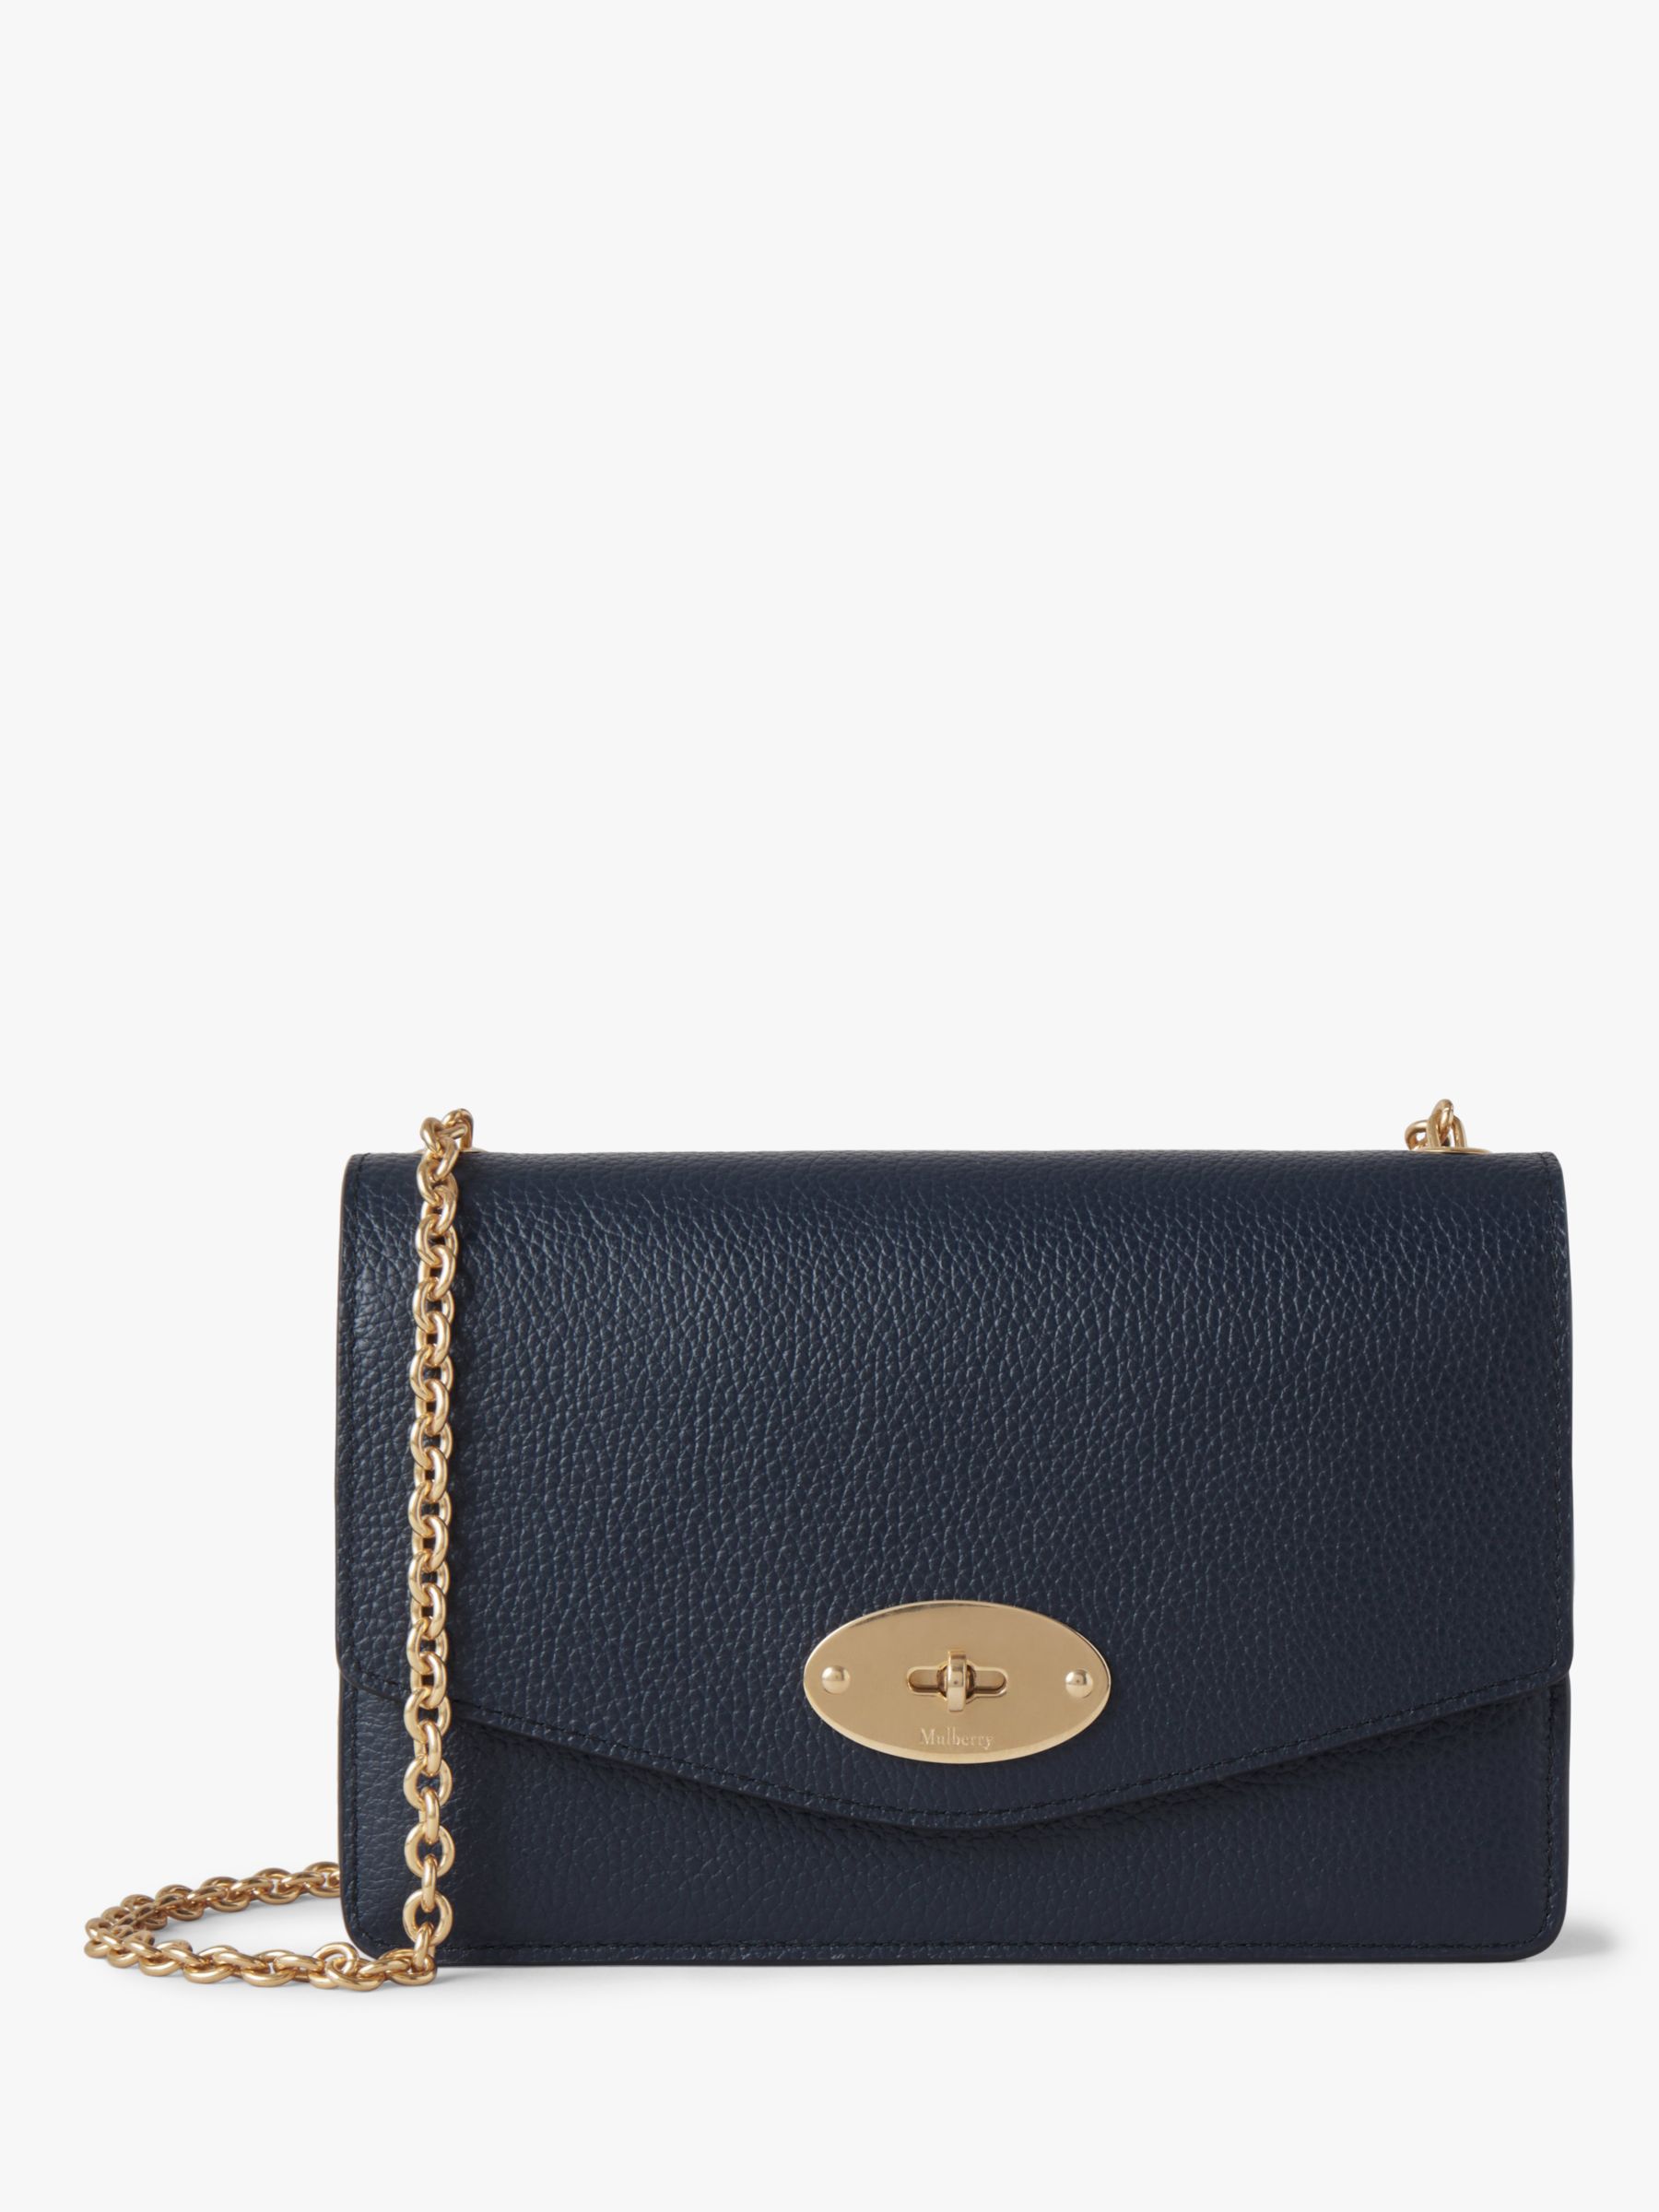 Buy Mulberry Small Darley Small Classic Grain Leather Clutch Bag Online at johnlewis.com